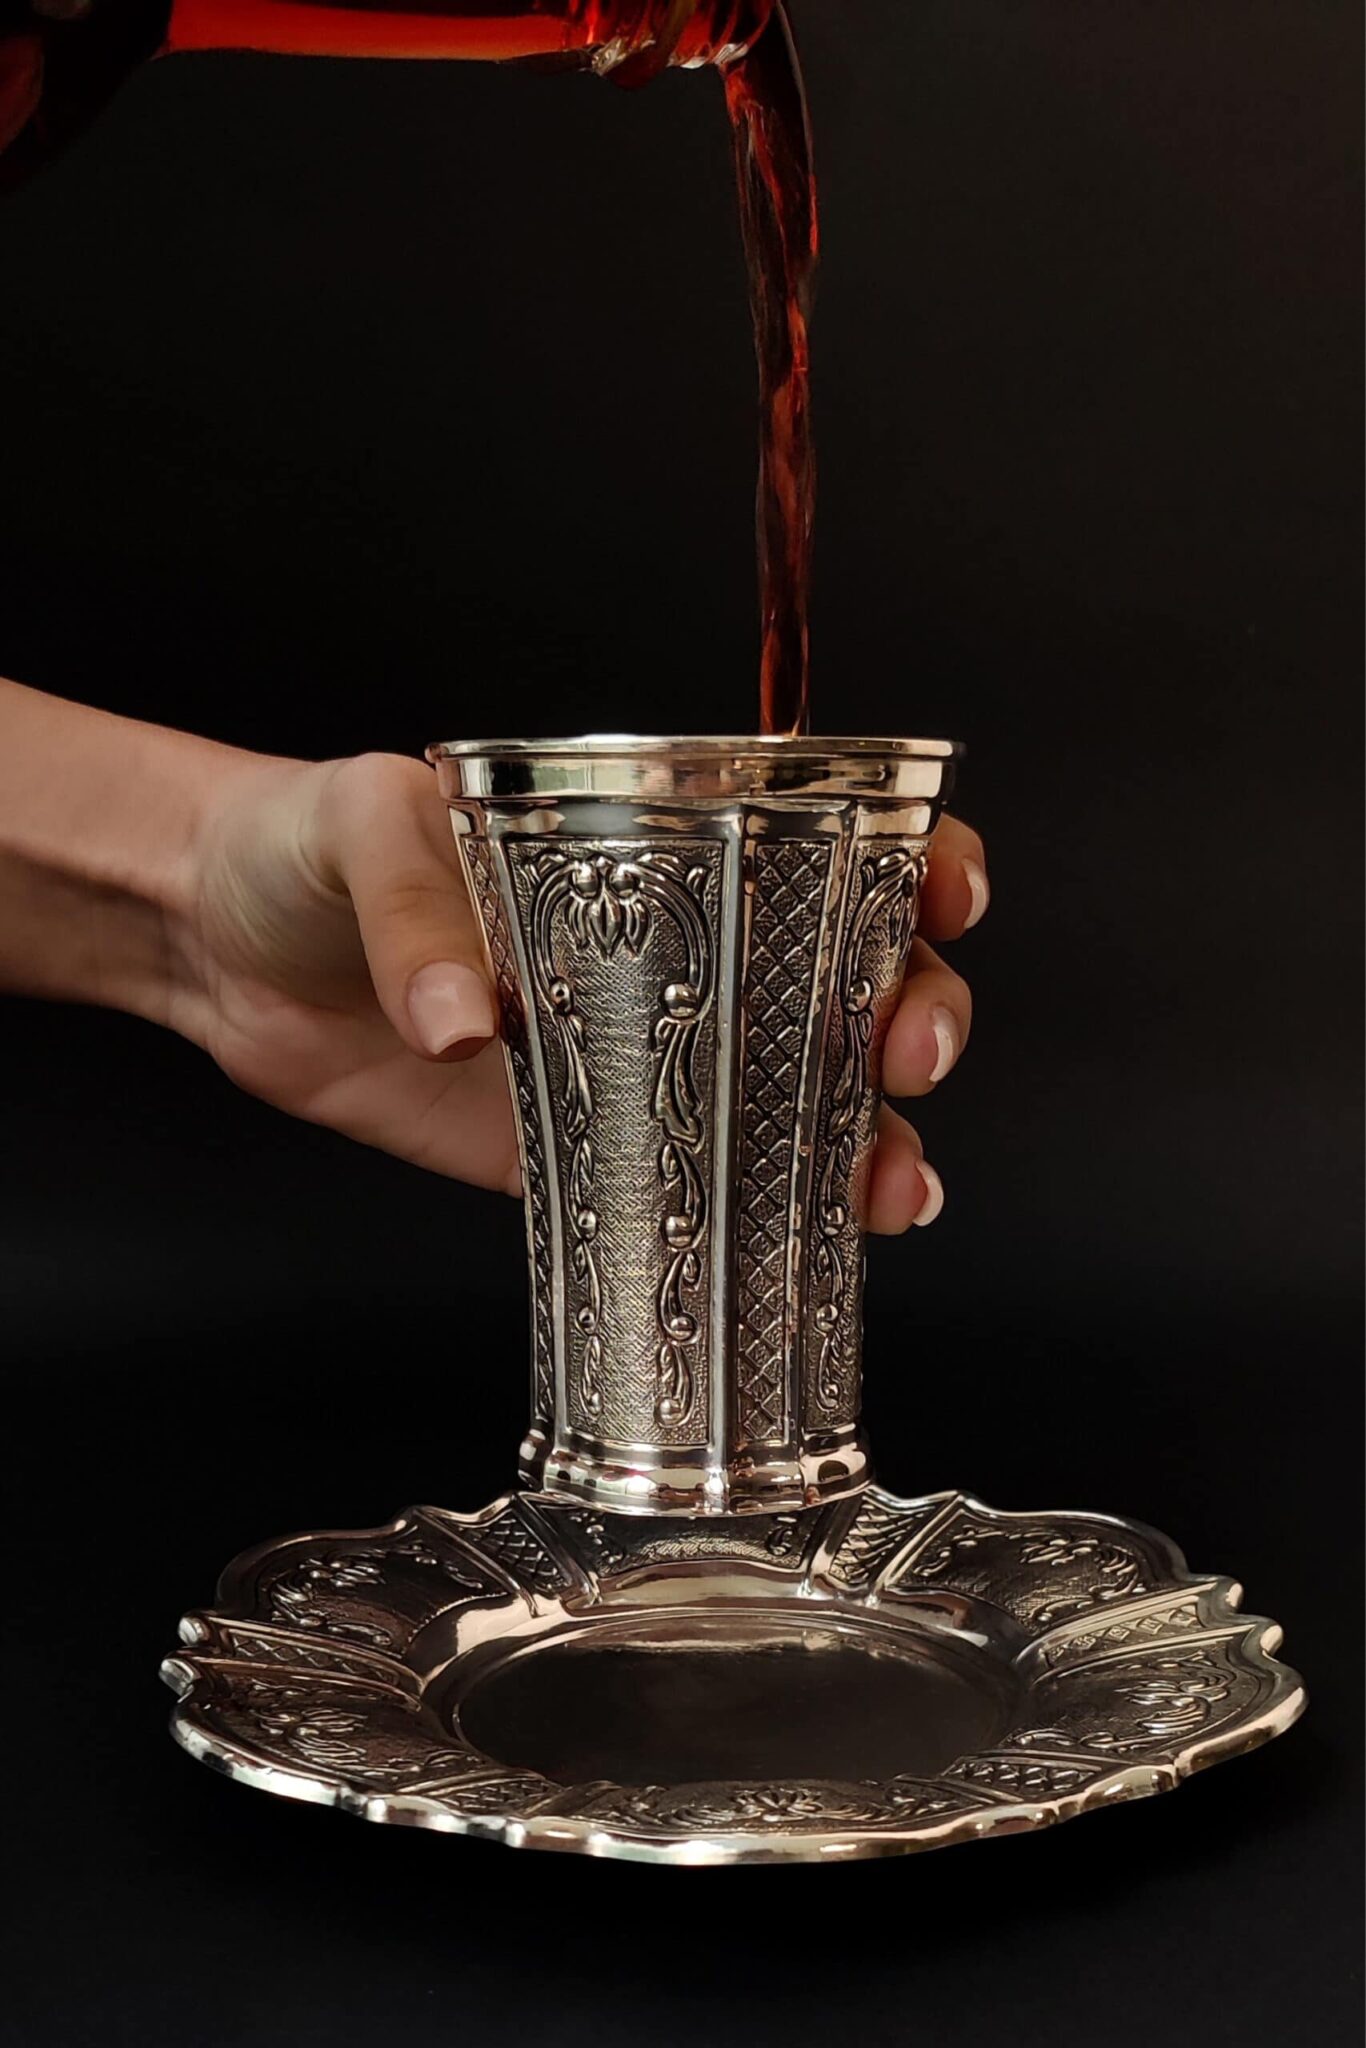 What is a kiddush cup?